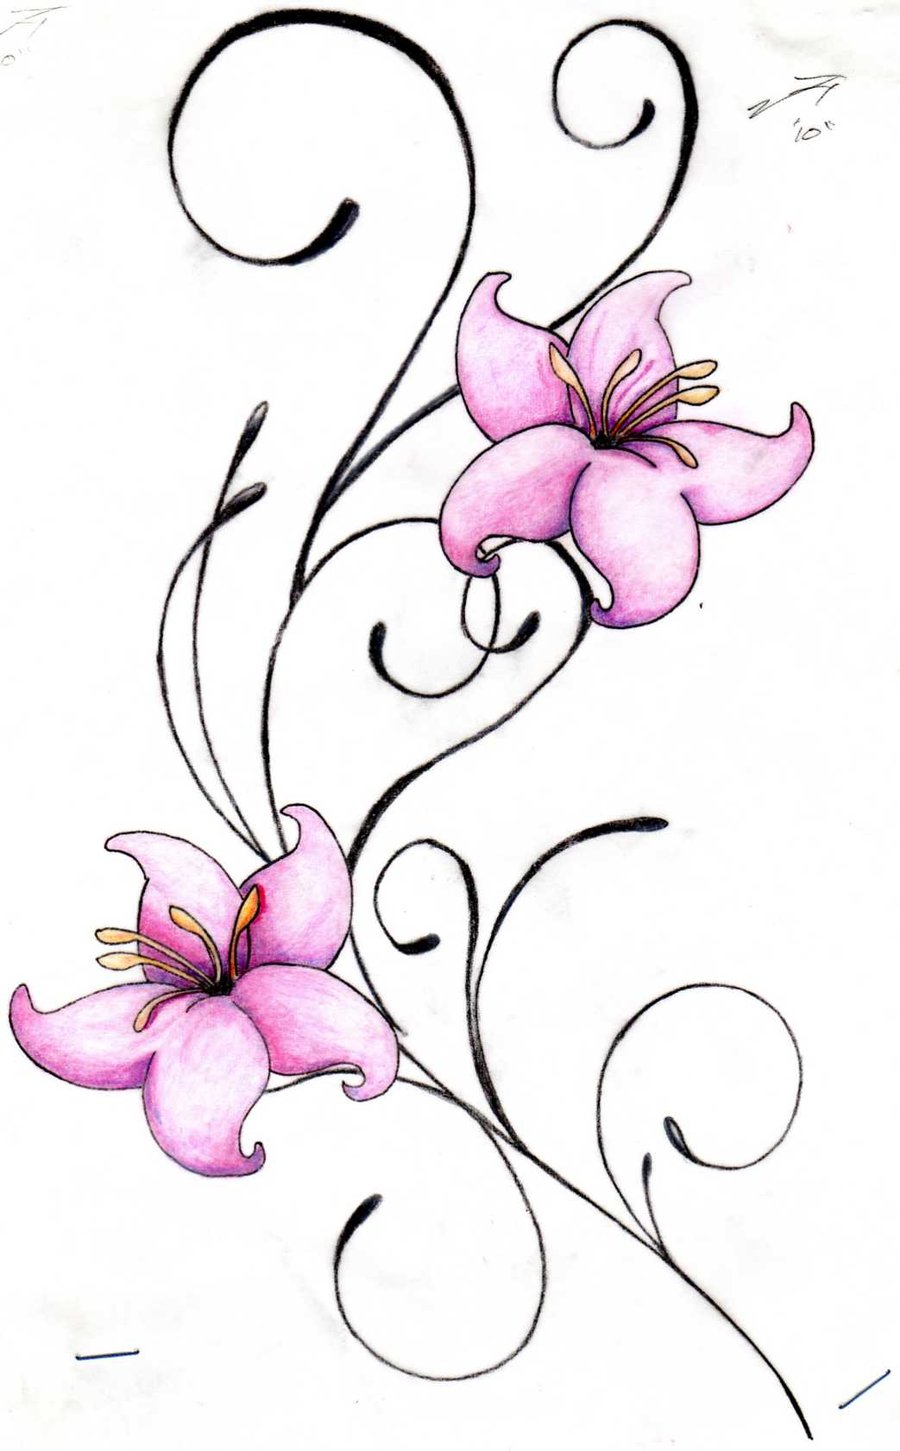 Free Tattoo Flower, Download Free Tattoo Flower png images, Free